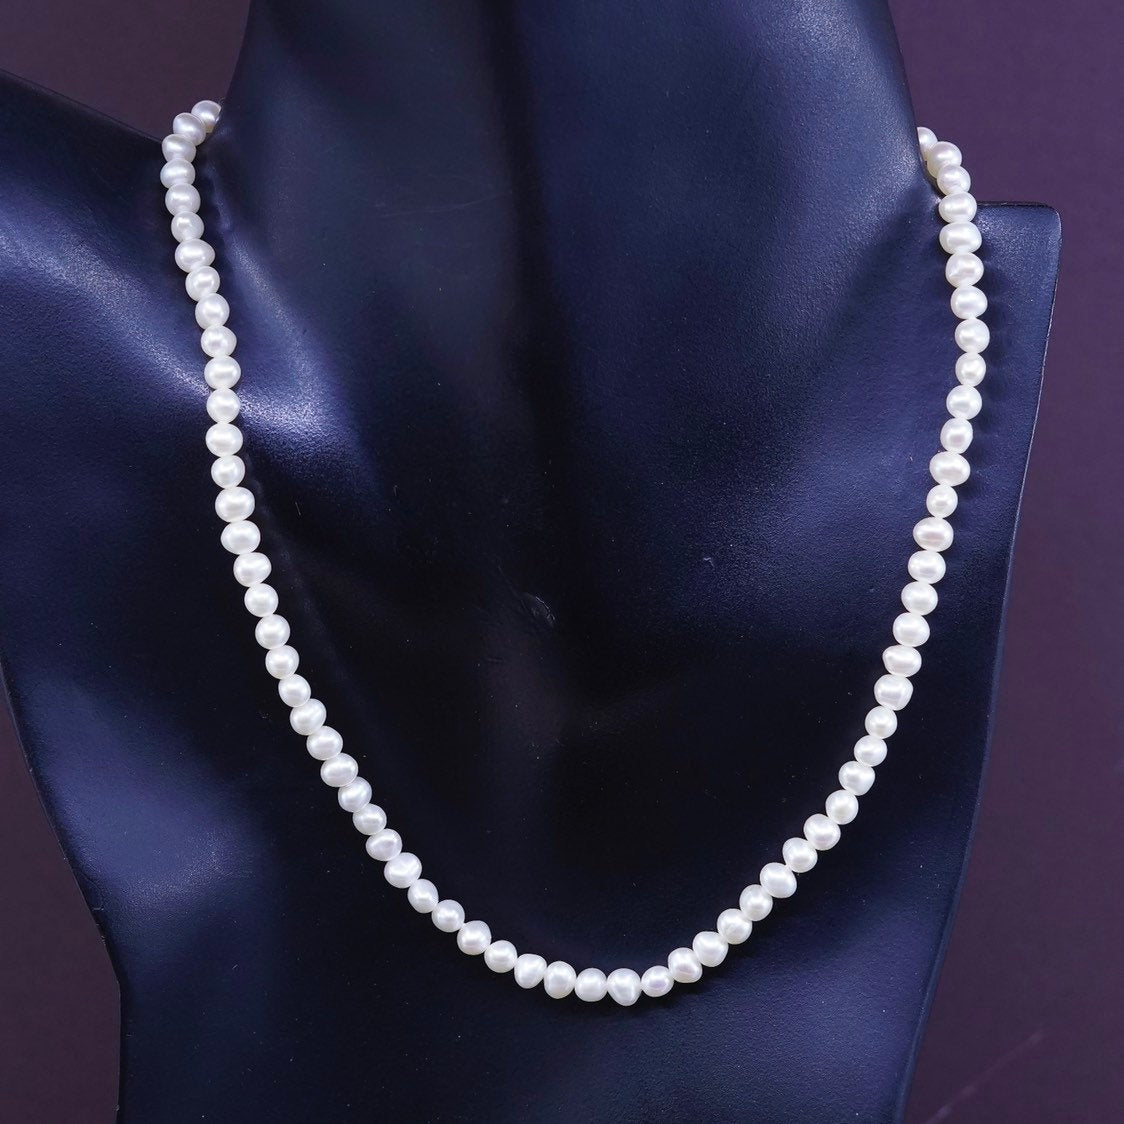 16"+1”, Sterling silver handmade necklace, 925 clasp w/ 4-5mm freshwater pearl